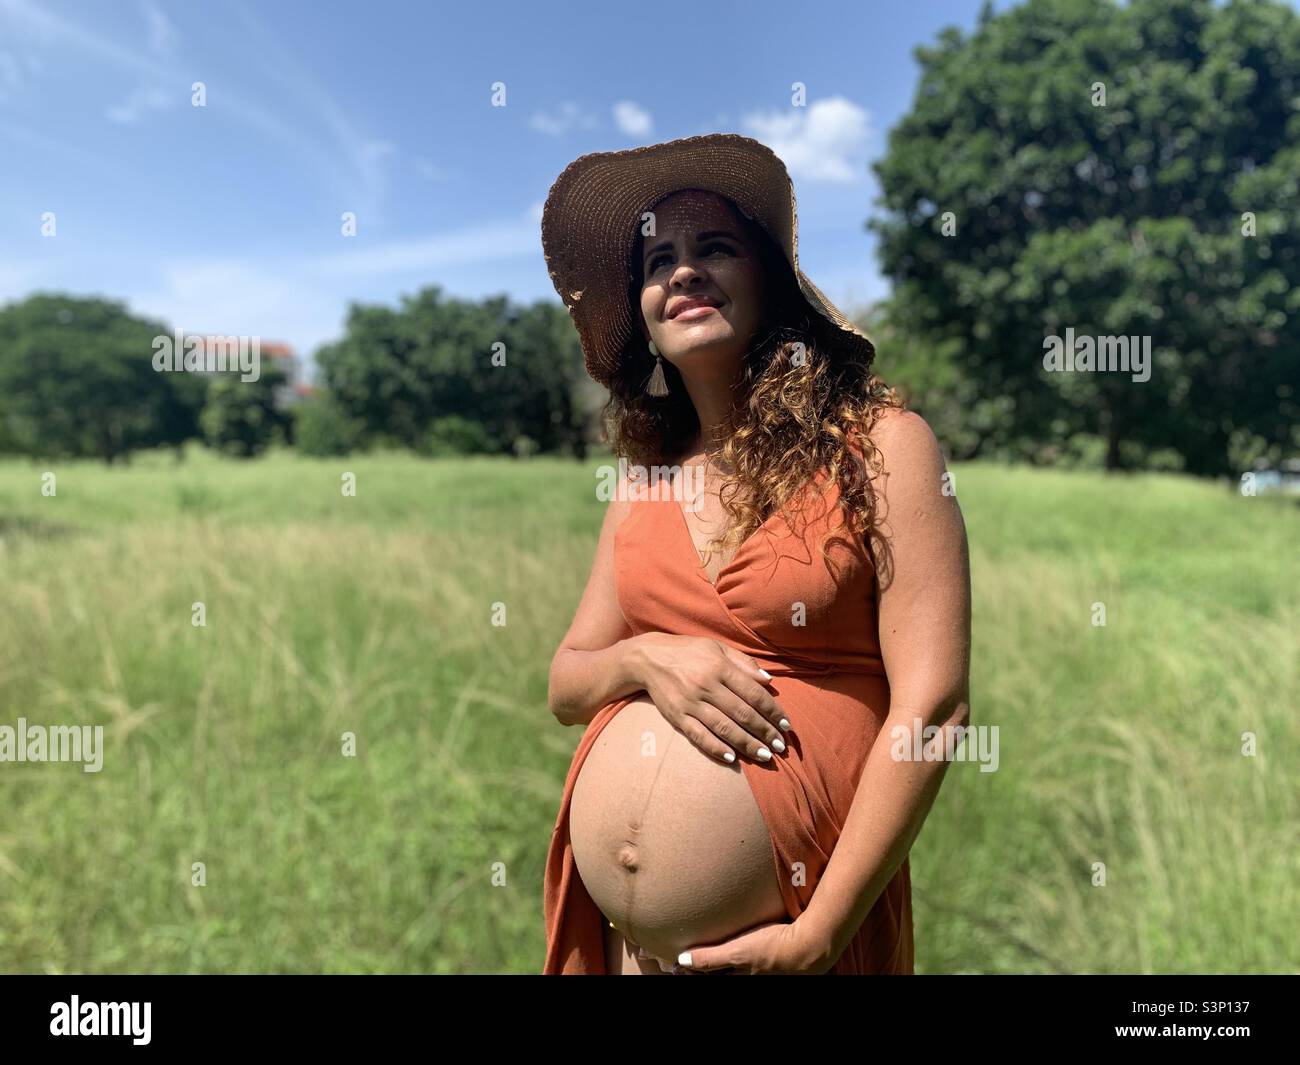 8 Month pregnant woman holding her belly. Linea nigra visible Stock Photo